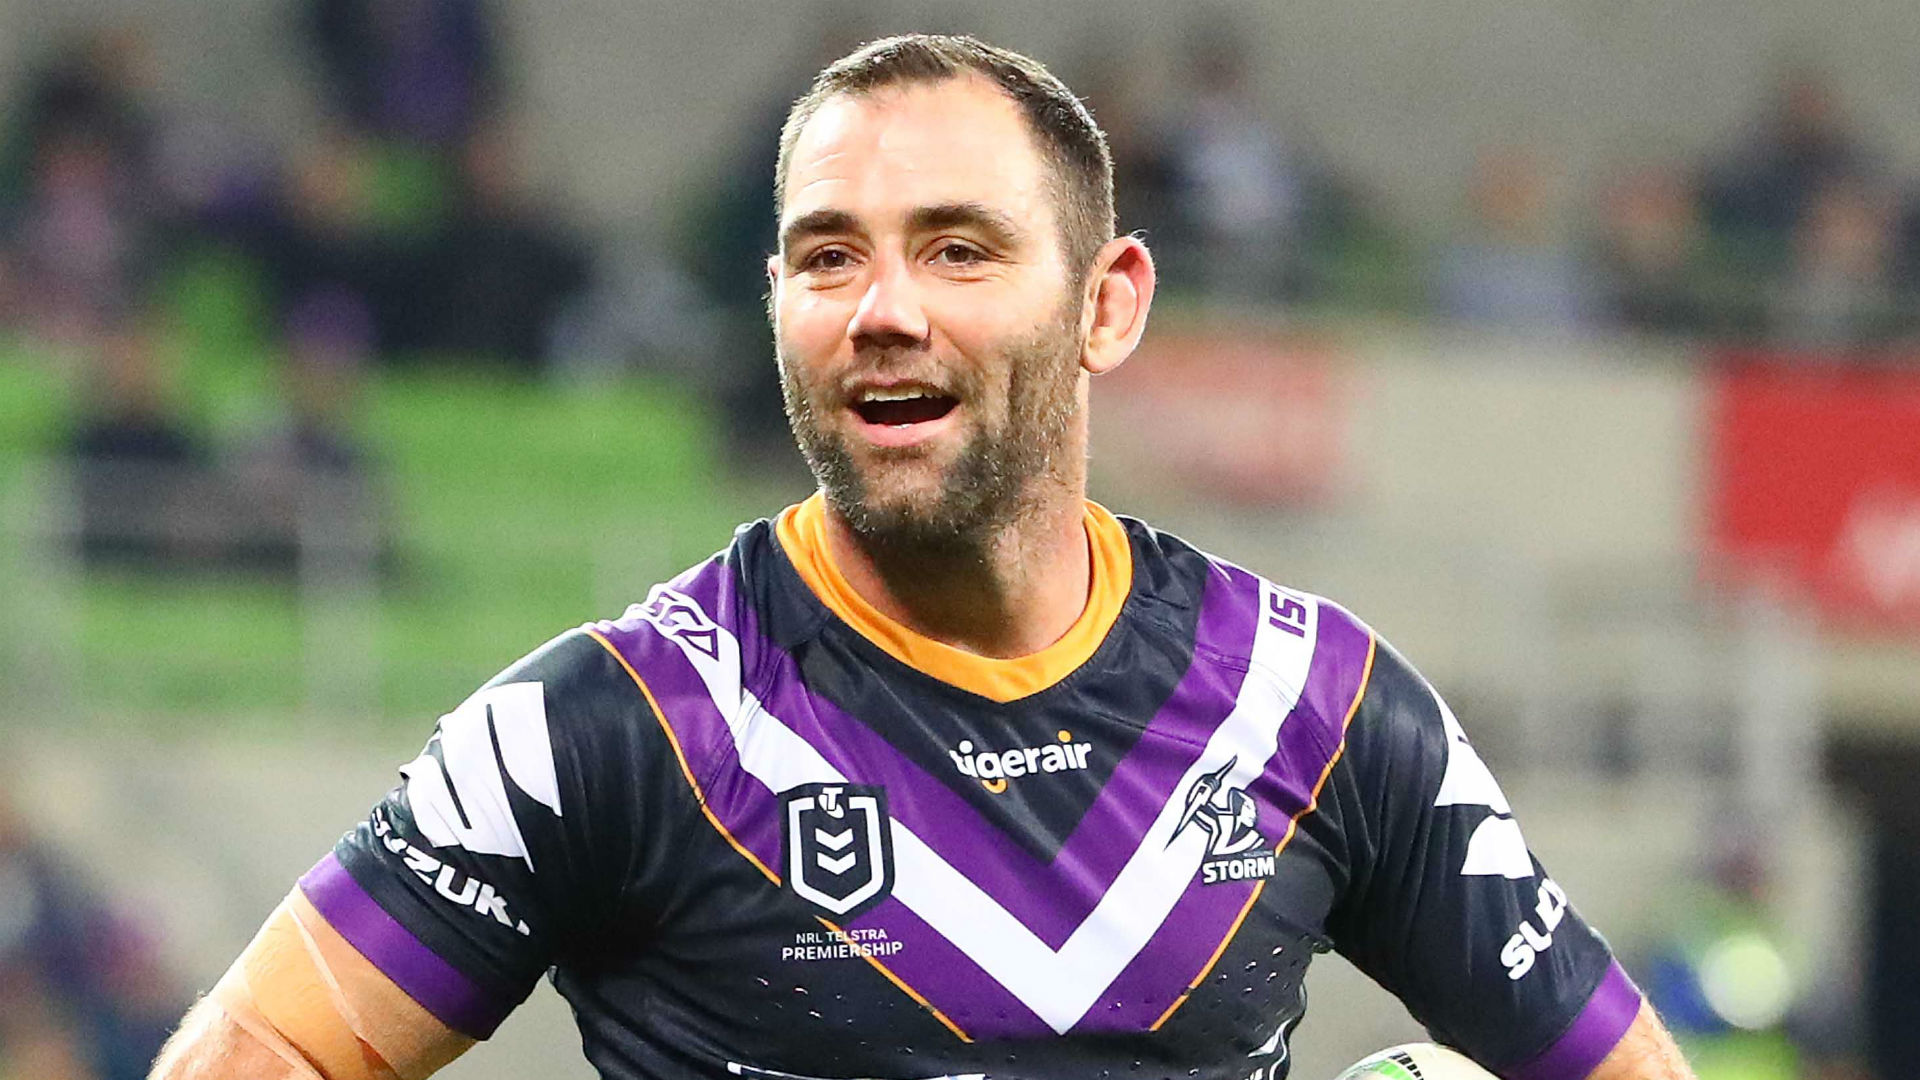 Ryan Papenhuyzen scored a stunning solo try and Will Chambers crossed late on to complete a Melbourne Storm fightback.